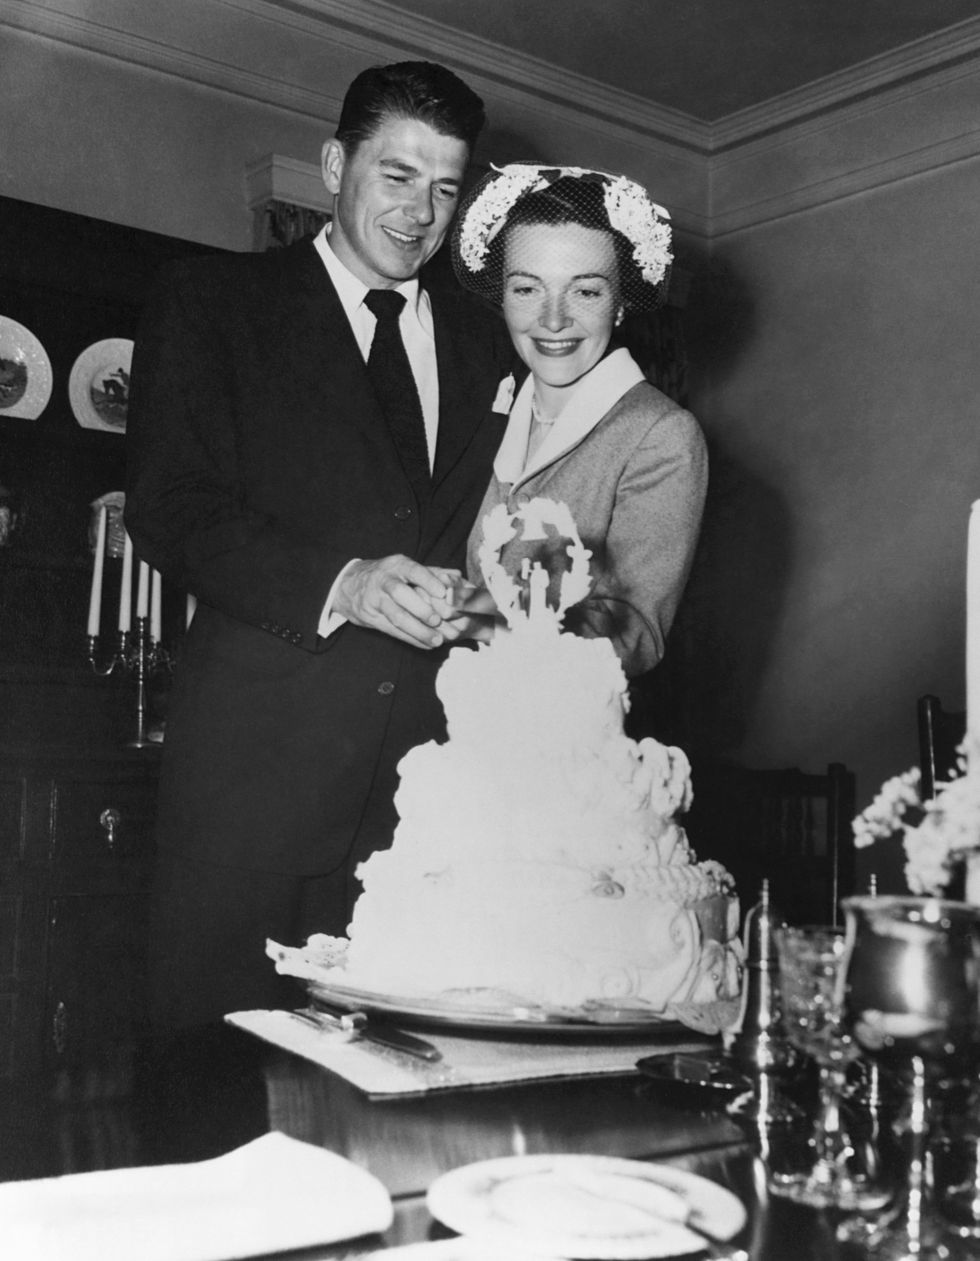 Ronald and Nancy Reagan cutting the cake at their wedding on March 4, 1952